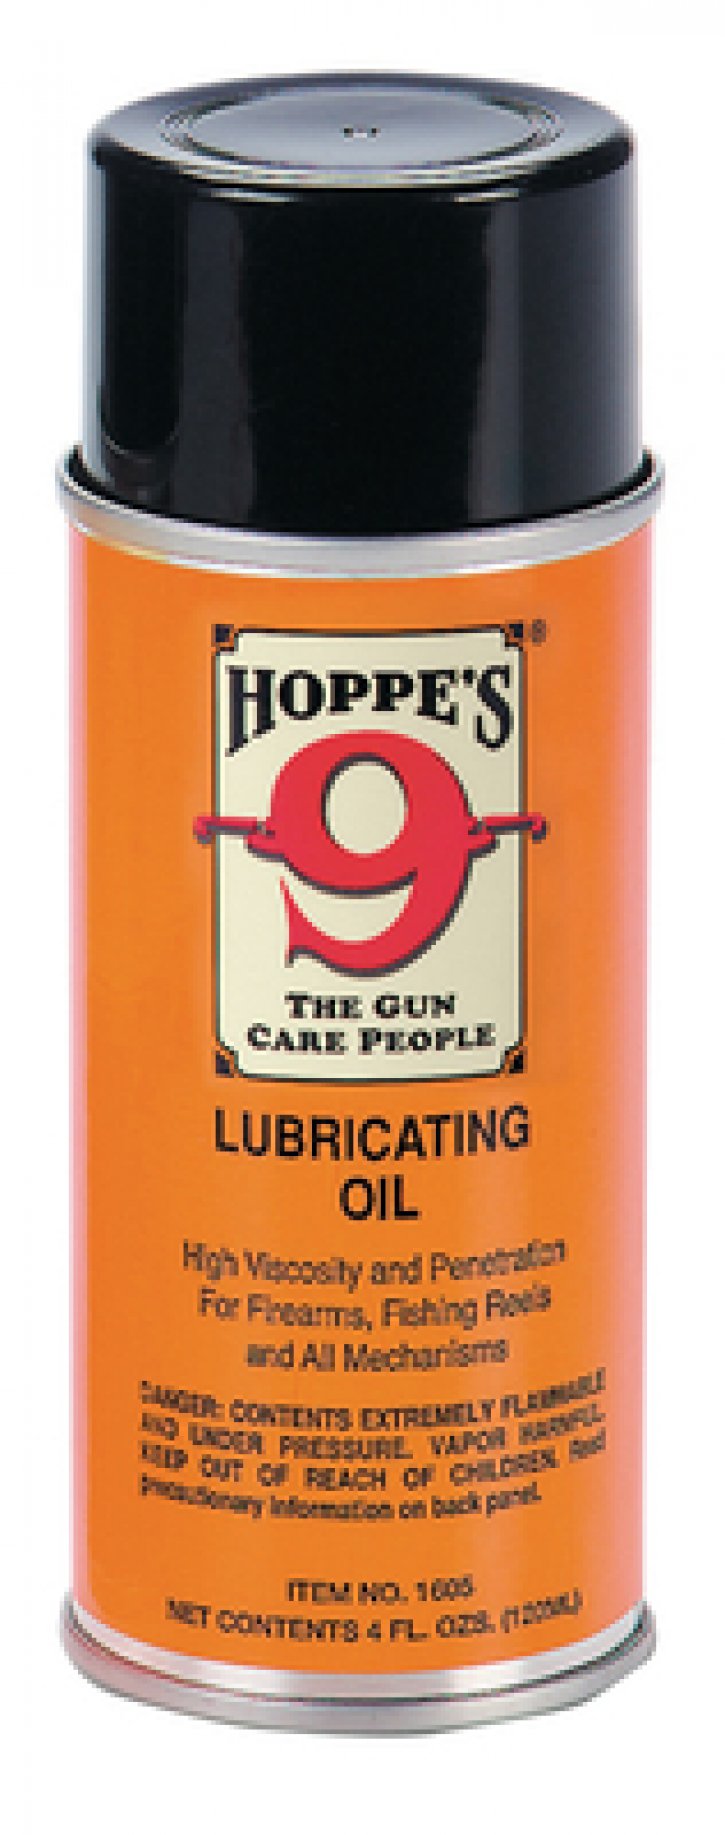 Hoppes Lubricating Oil 4 Ounce Aerosol 1605H Cleaning - Arnzen Arms